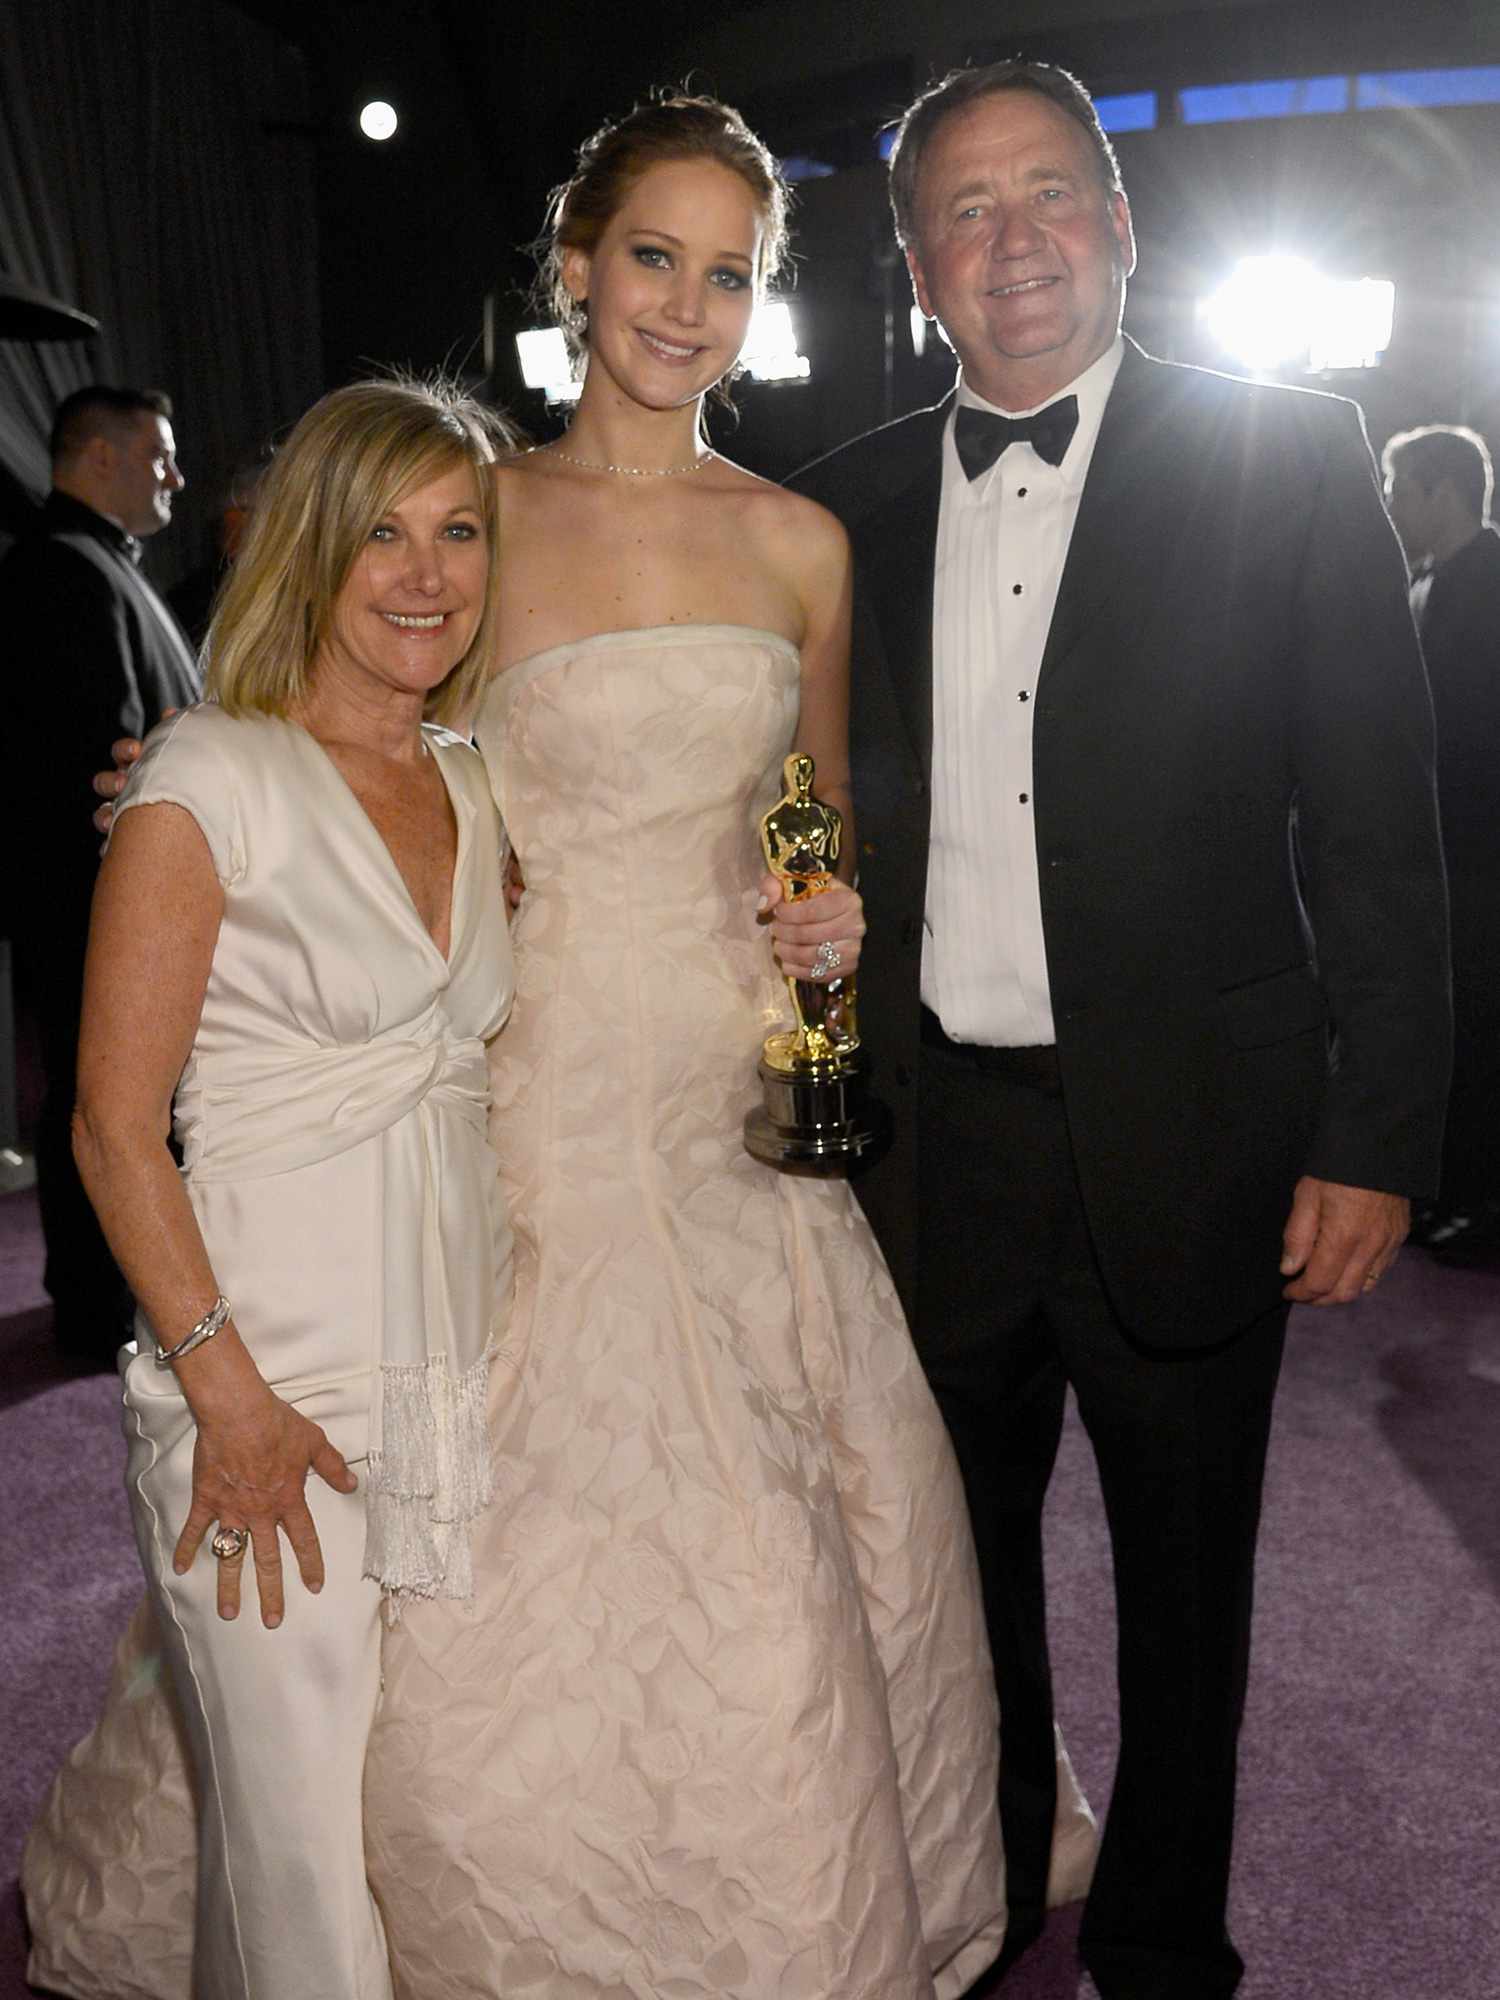 Jennifer Lawrence, Karen Lawrence, and Gary Lawrence attend the 2013 Oscars Governors Ball